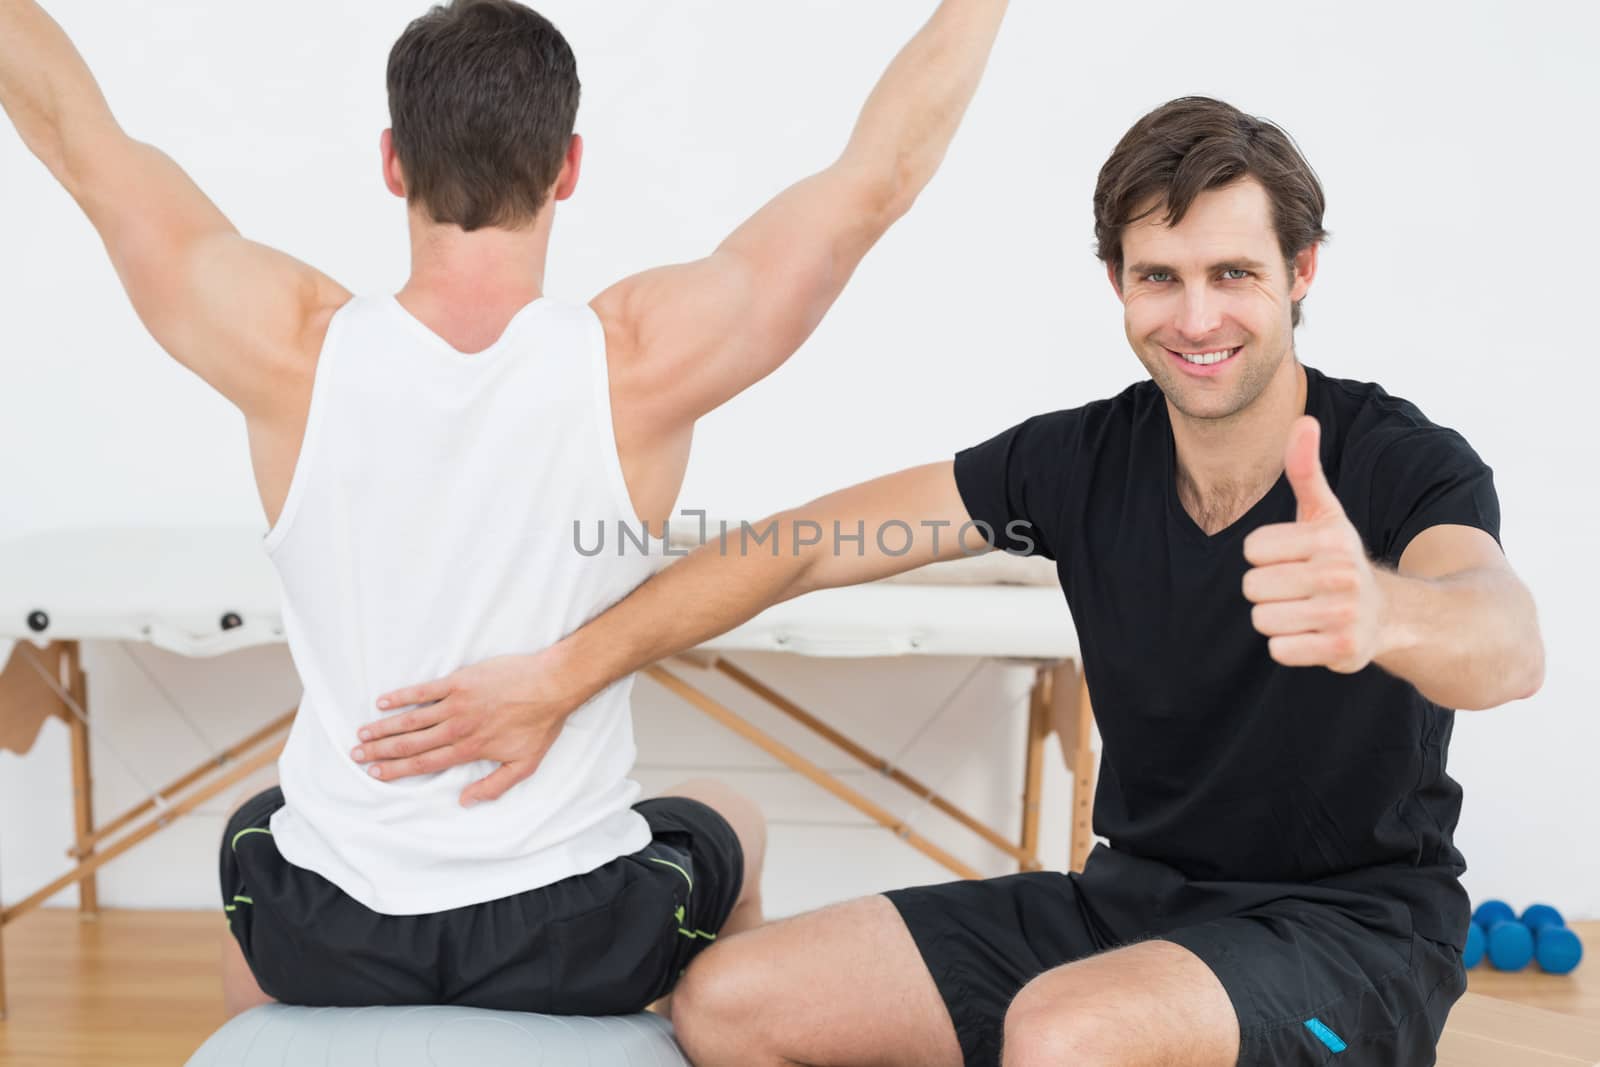 Therapist gestures thumbs up besides man on yoga ball by Wavebreakmedia